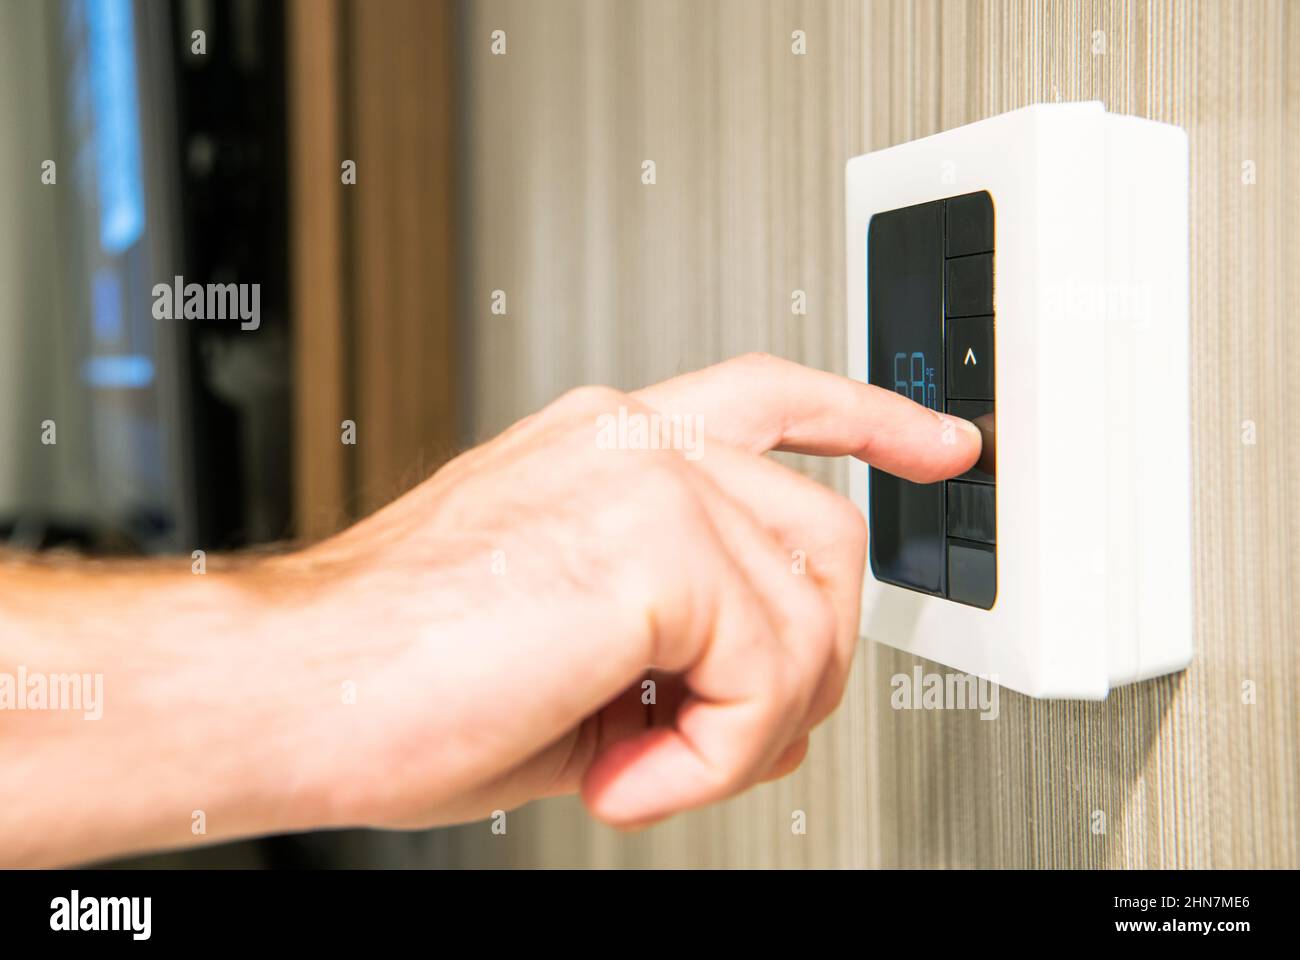 Caucasian Men Setting Residential Modern Wall Thermostat to Lower Temperature To Save Energy During Winter Time Colder Days. Stock Photo